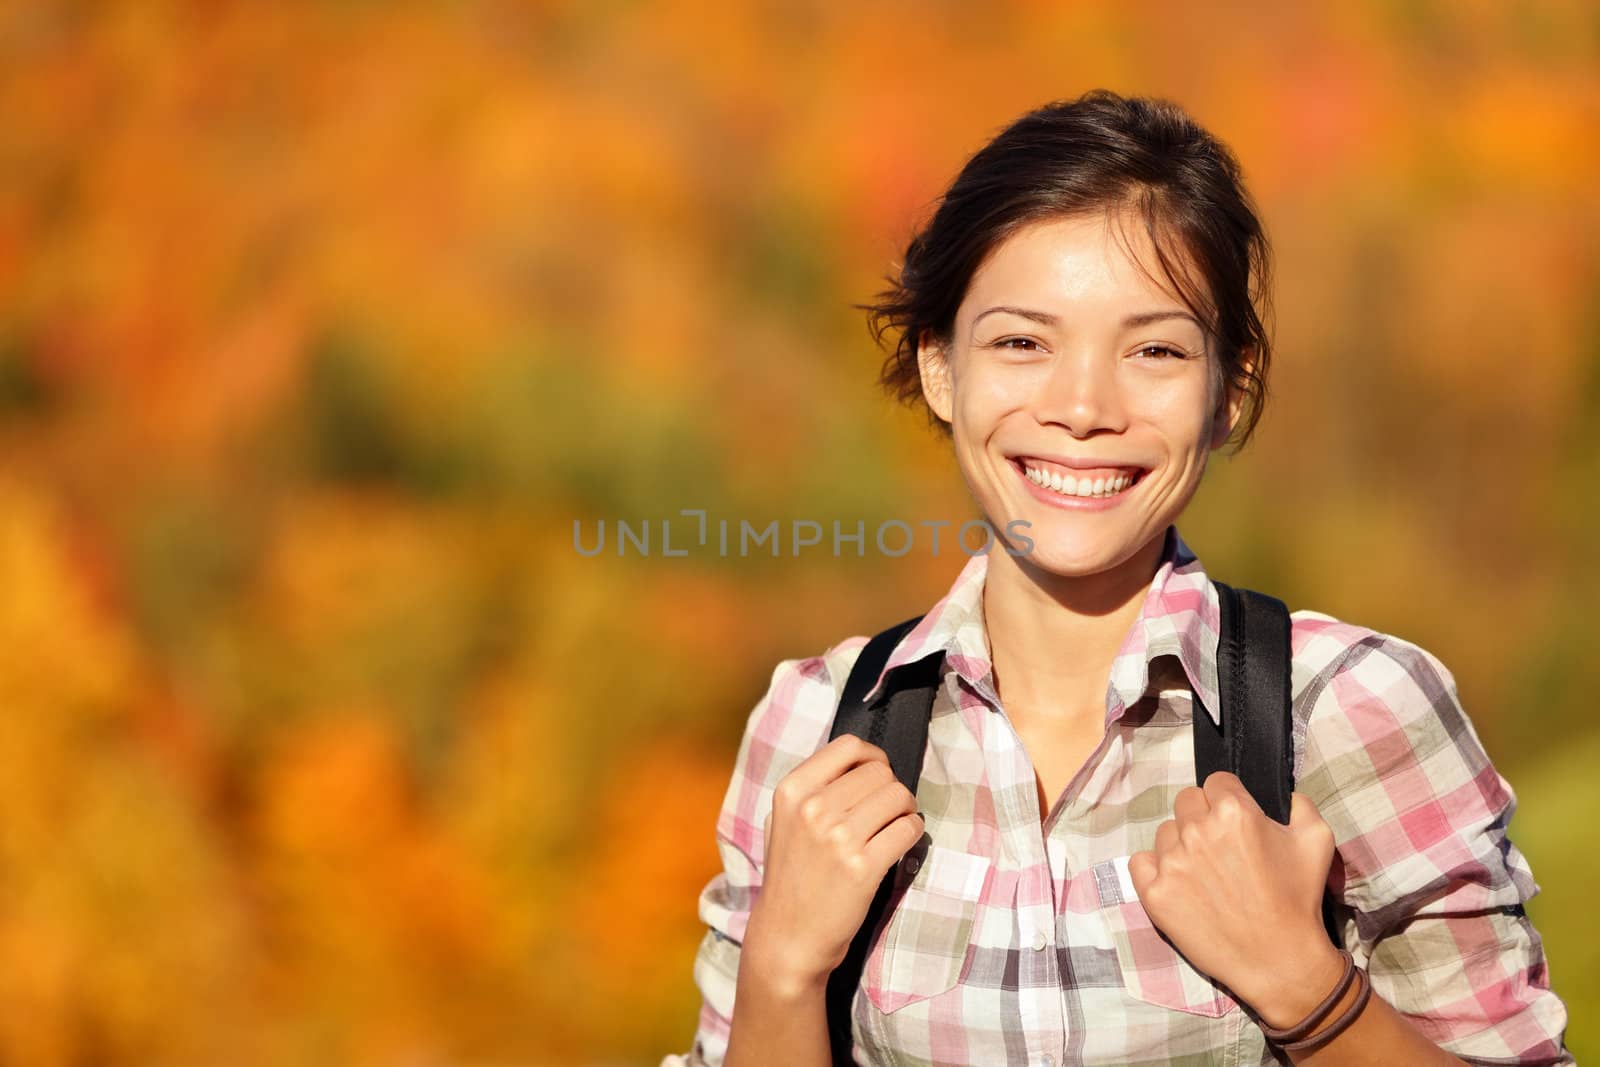 hiker hiking in Autumn forest. Young outdoors woman smiling happy during hike in beautiful fall colored forest. Fresh Mixed race Chinese Asian Caucasian female model.